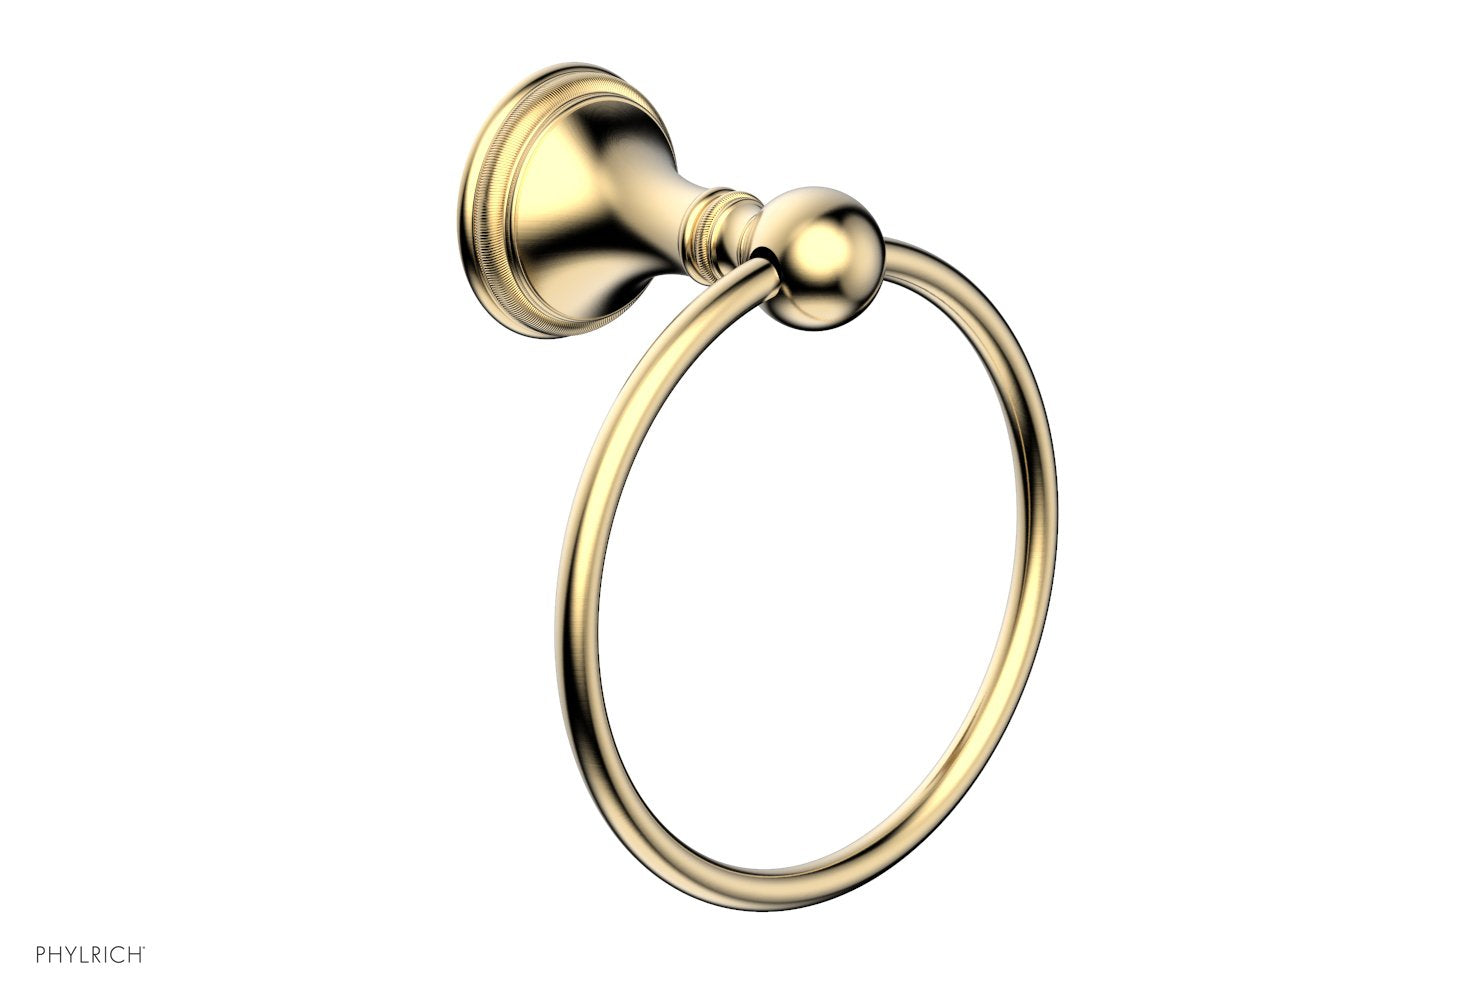 Phylrich COINED Towel Ring